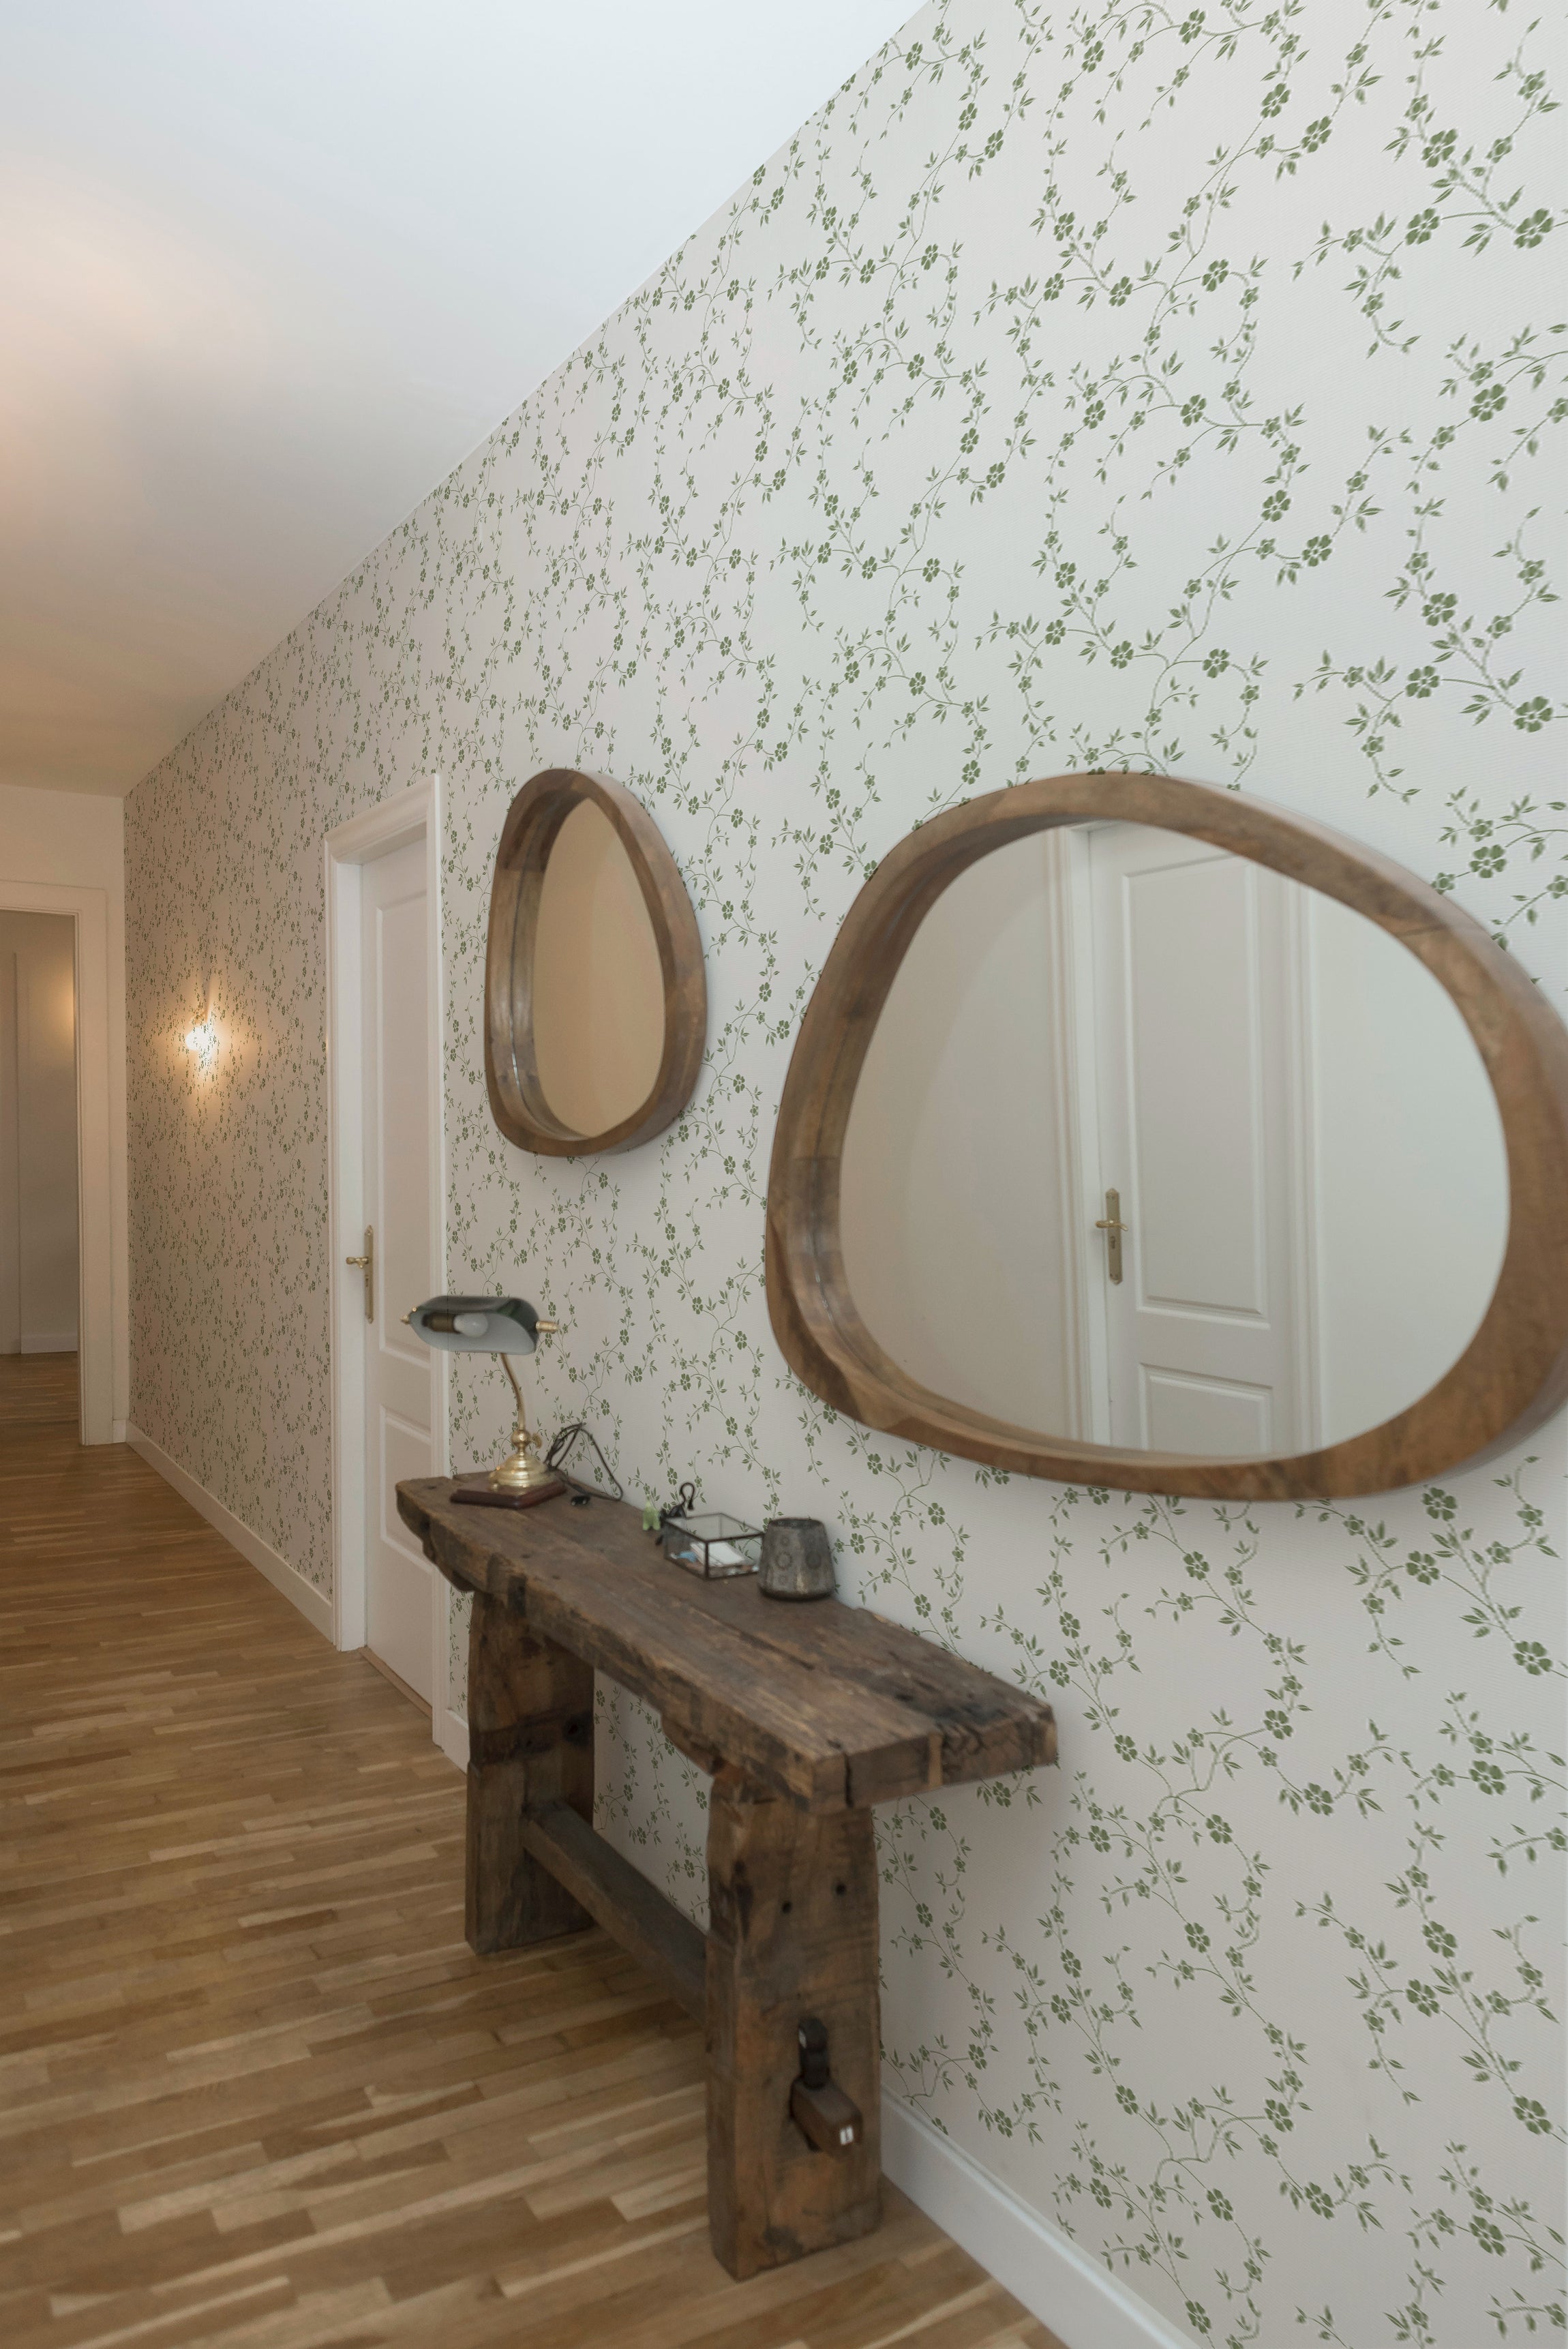 A spacious hallway is lined with the Charming Floral Wallpaper-Moss, enhancing the area with a classic, botanical charm. Two round wooden mirrors hang on the wallpapered wall above a rustic wooden bench, creating a welcoming and homey atmosphere.